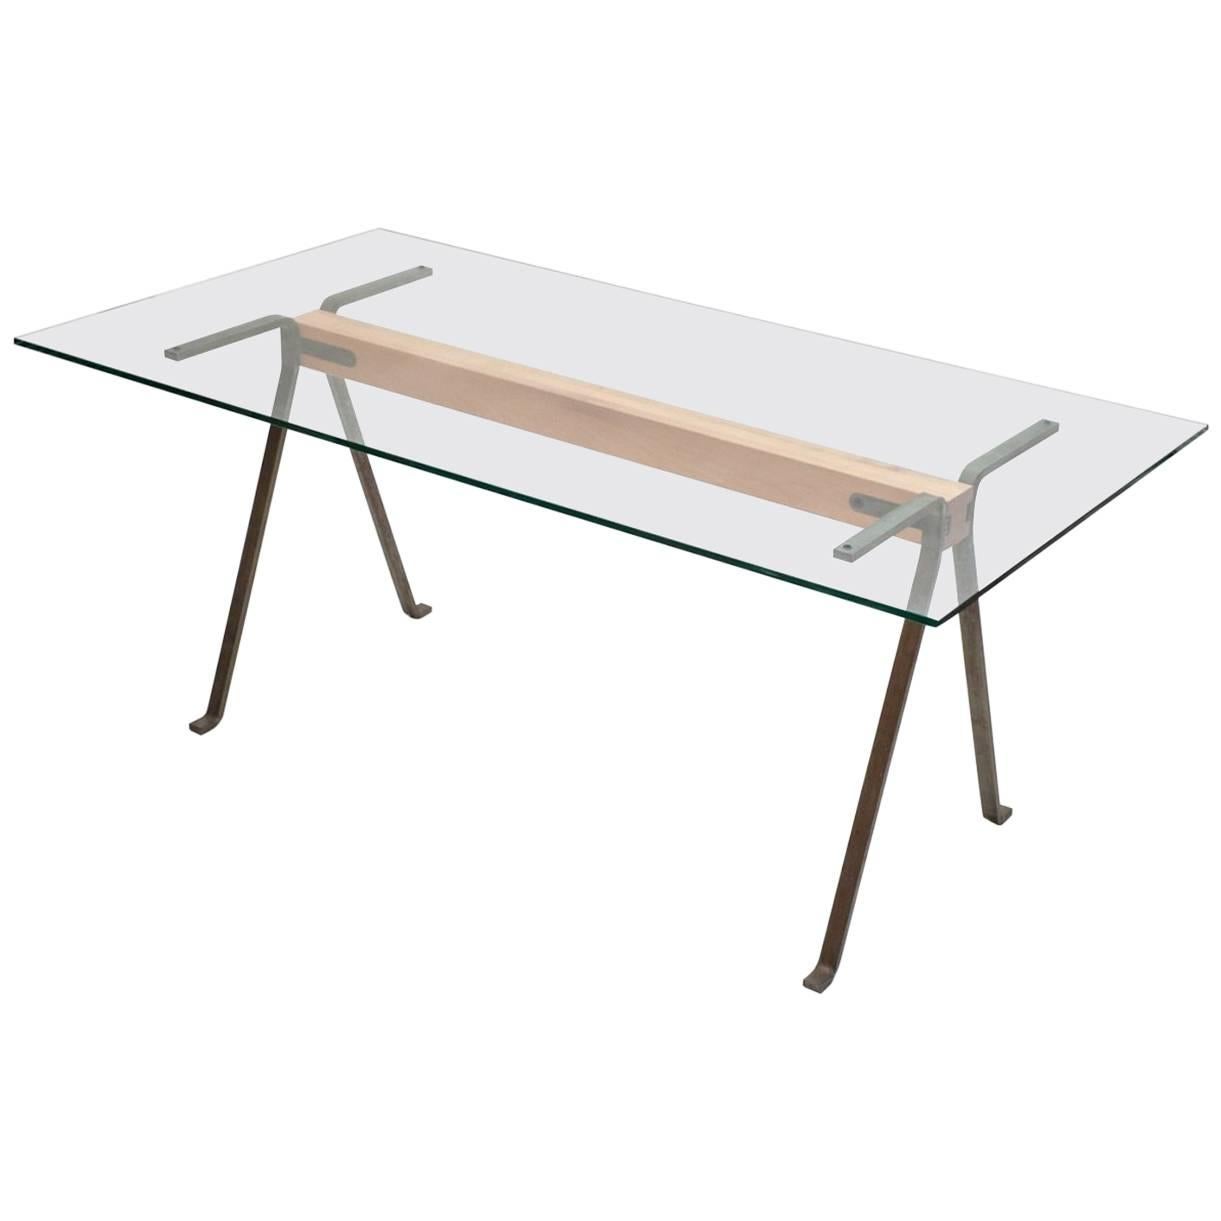 "Frate" Tempered Glass Top Benchwood Beam and Steel Table by E. Mari for Driade For Sale